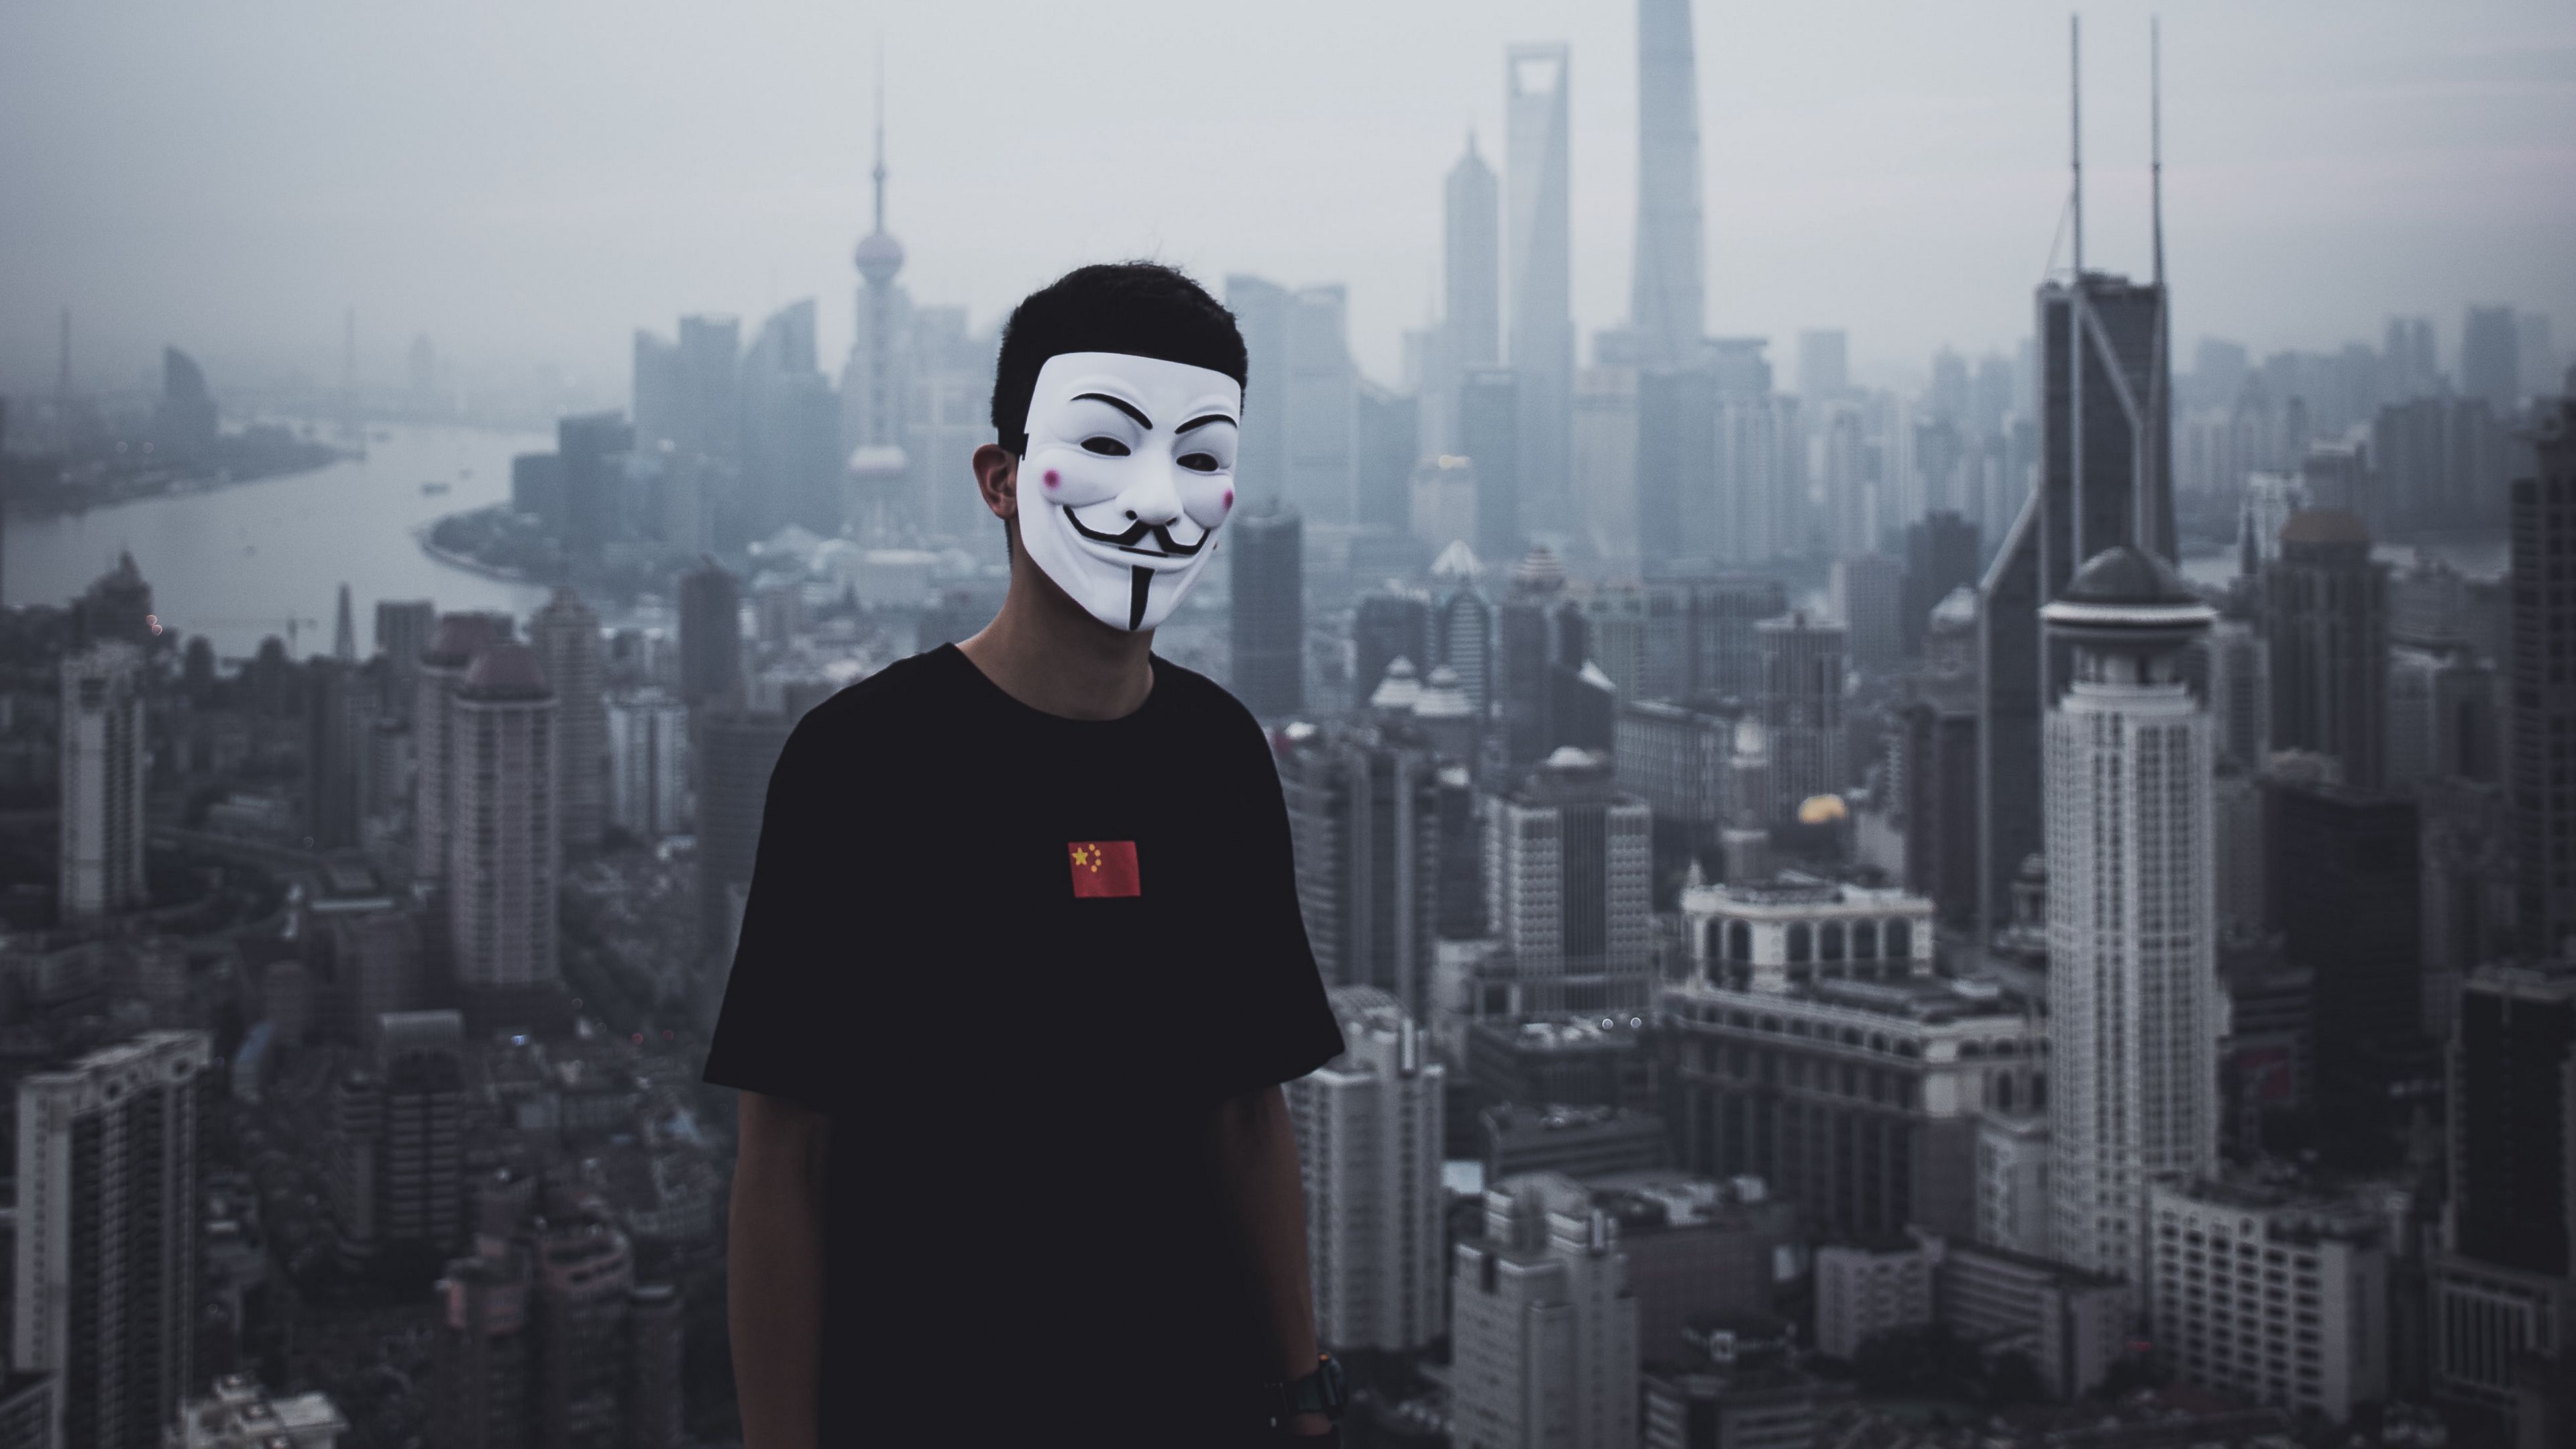 Download wallpaper 3840x2160 man, mask, city, buildings, view, overview